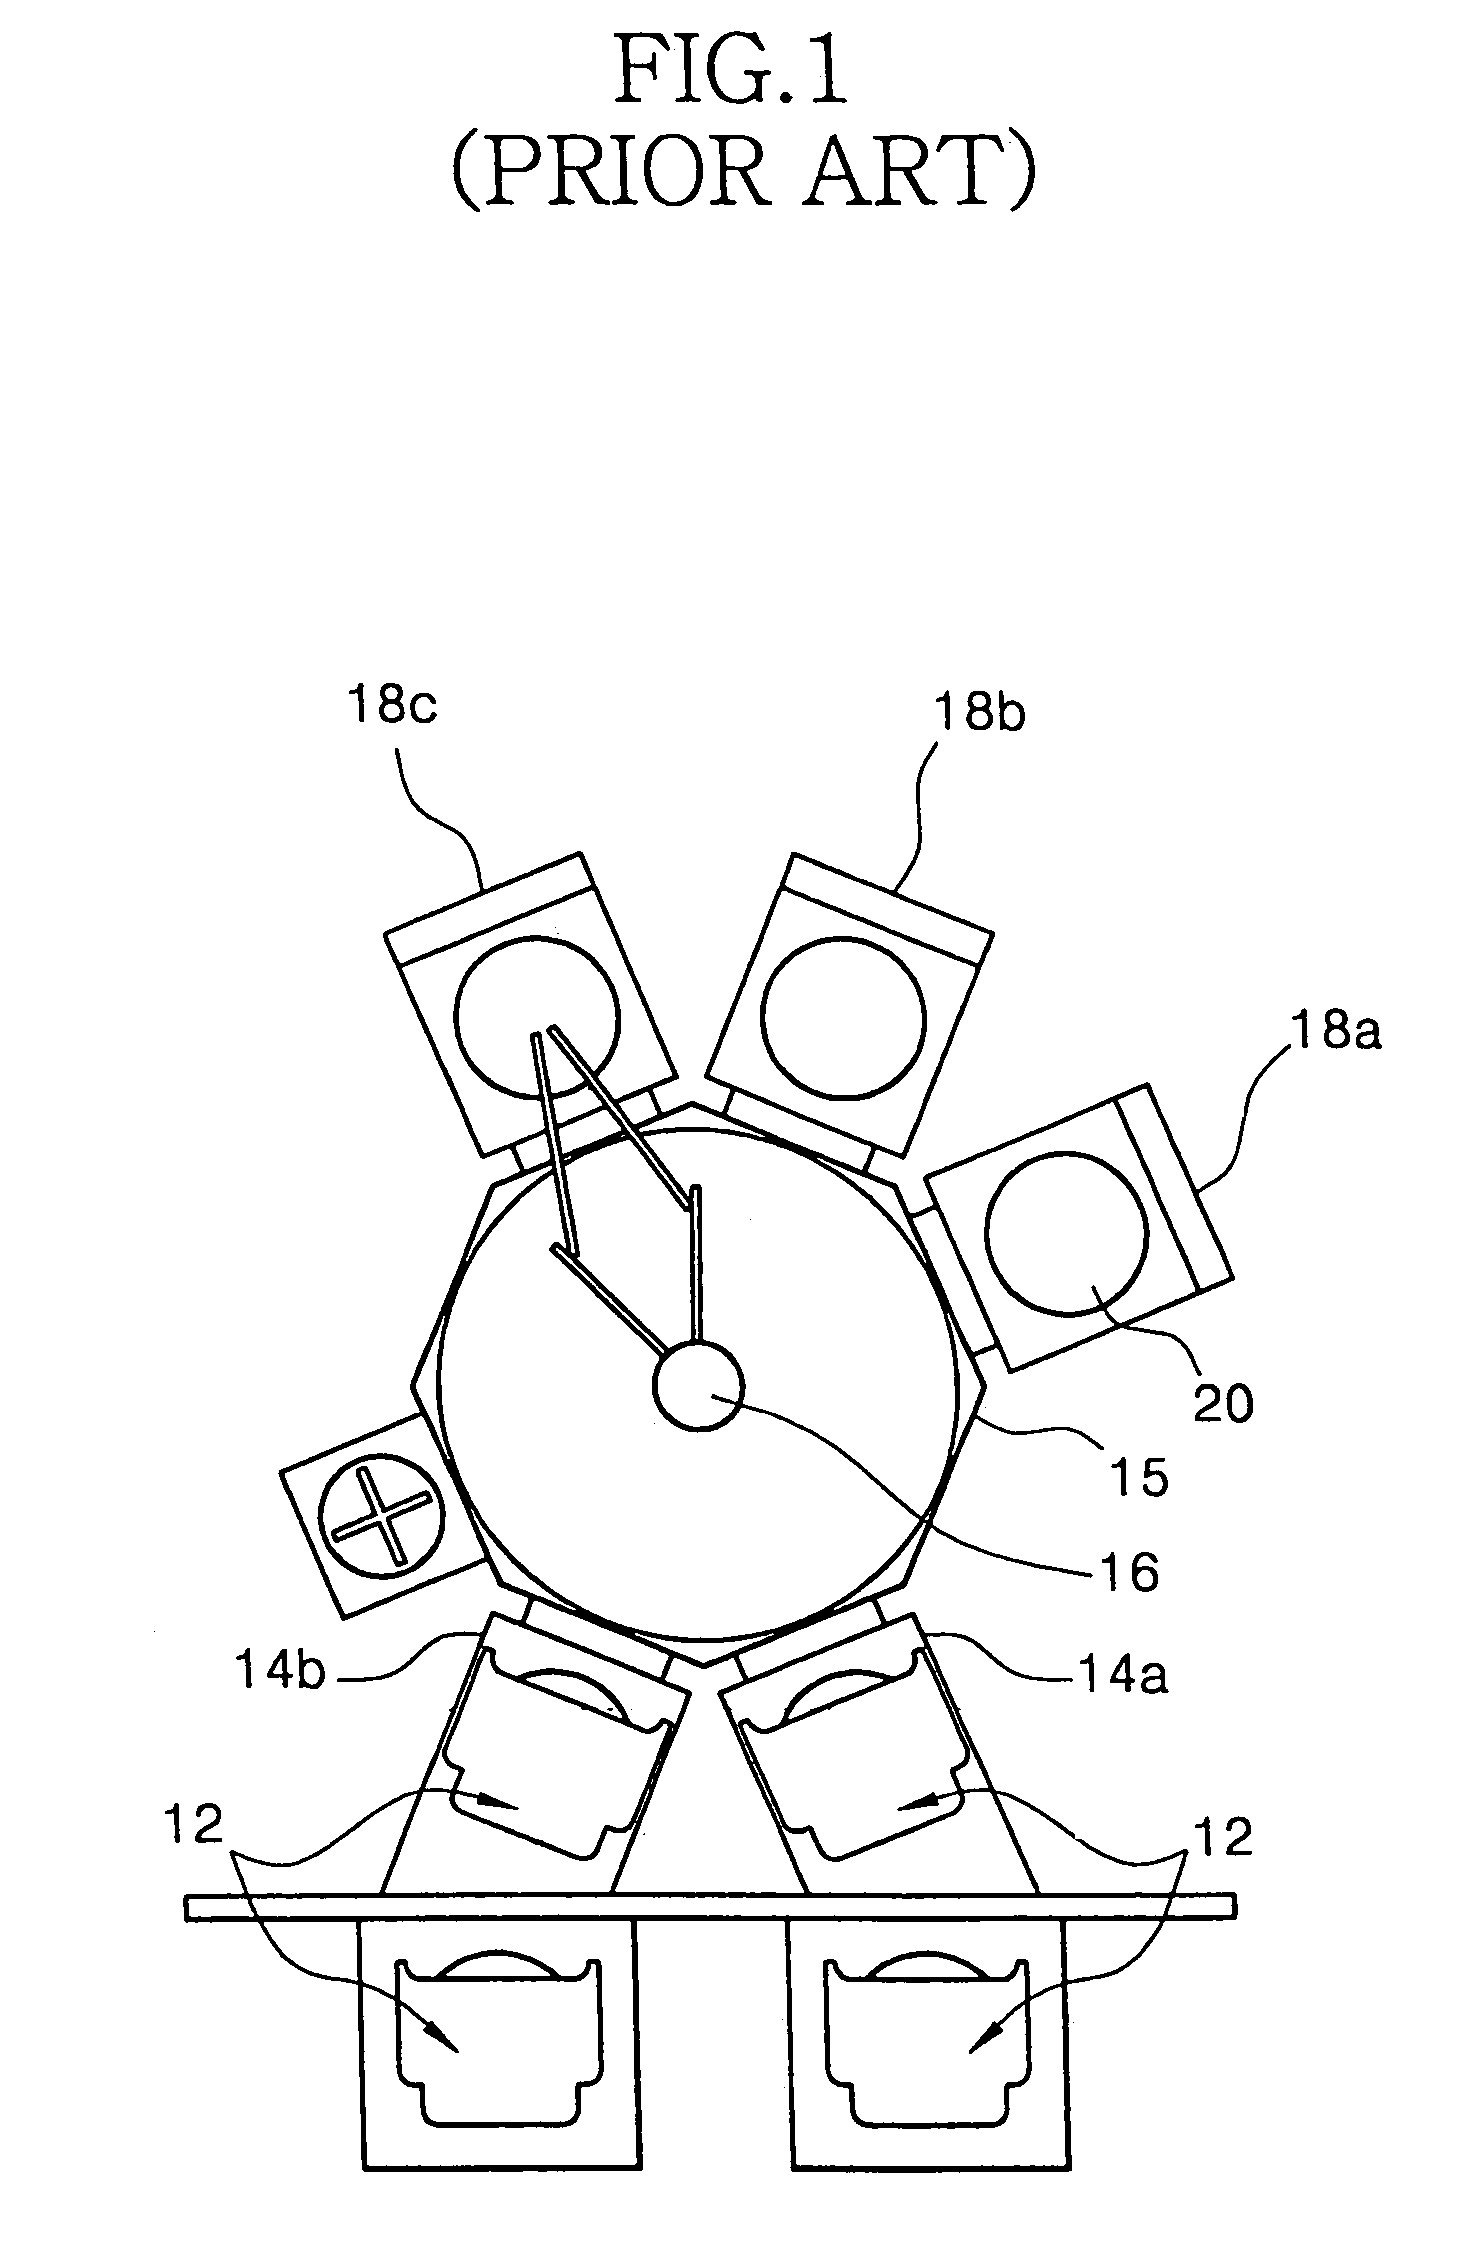 Substrate processing apparatus and method of processing substrate while controlling for contamination in substrate transfer module